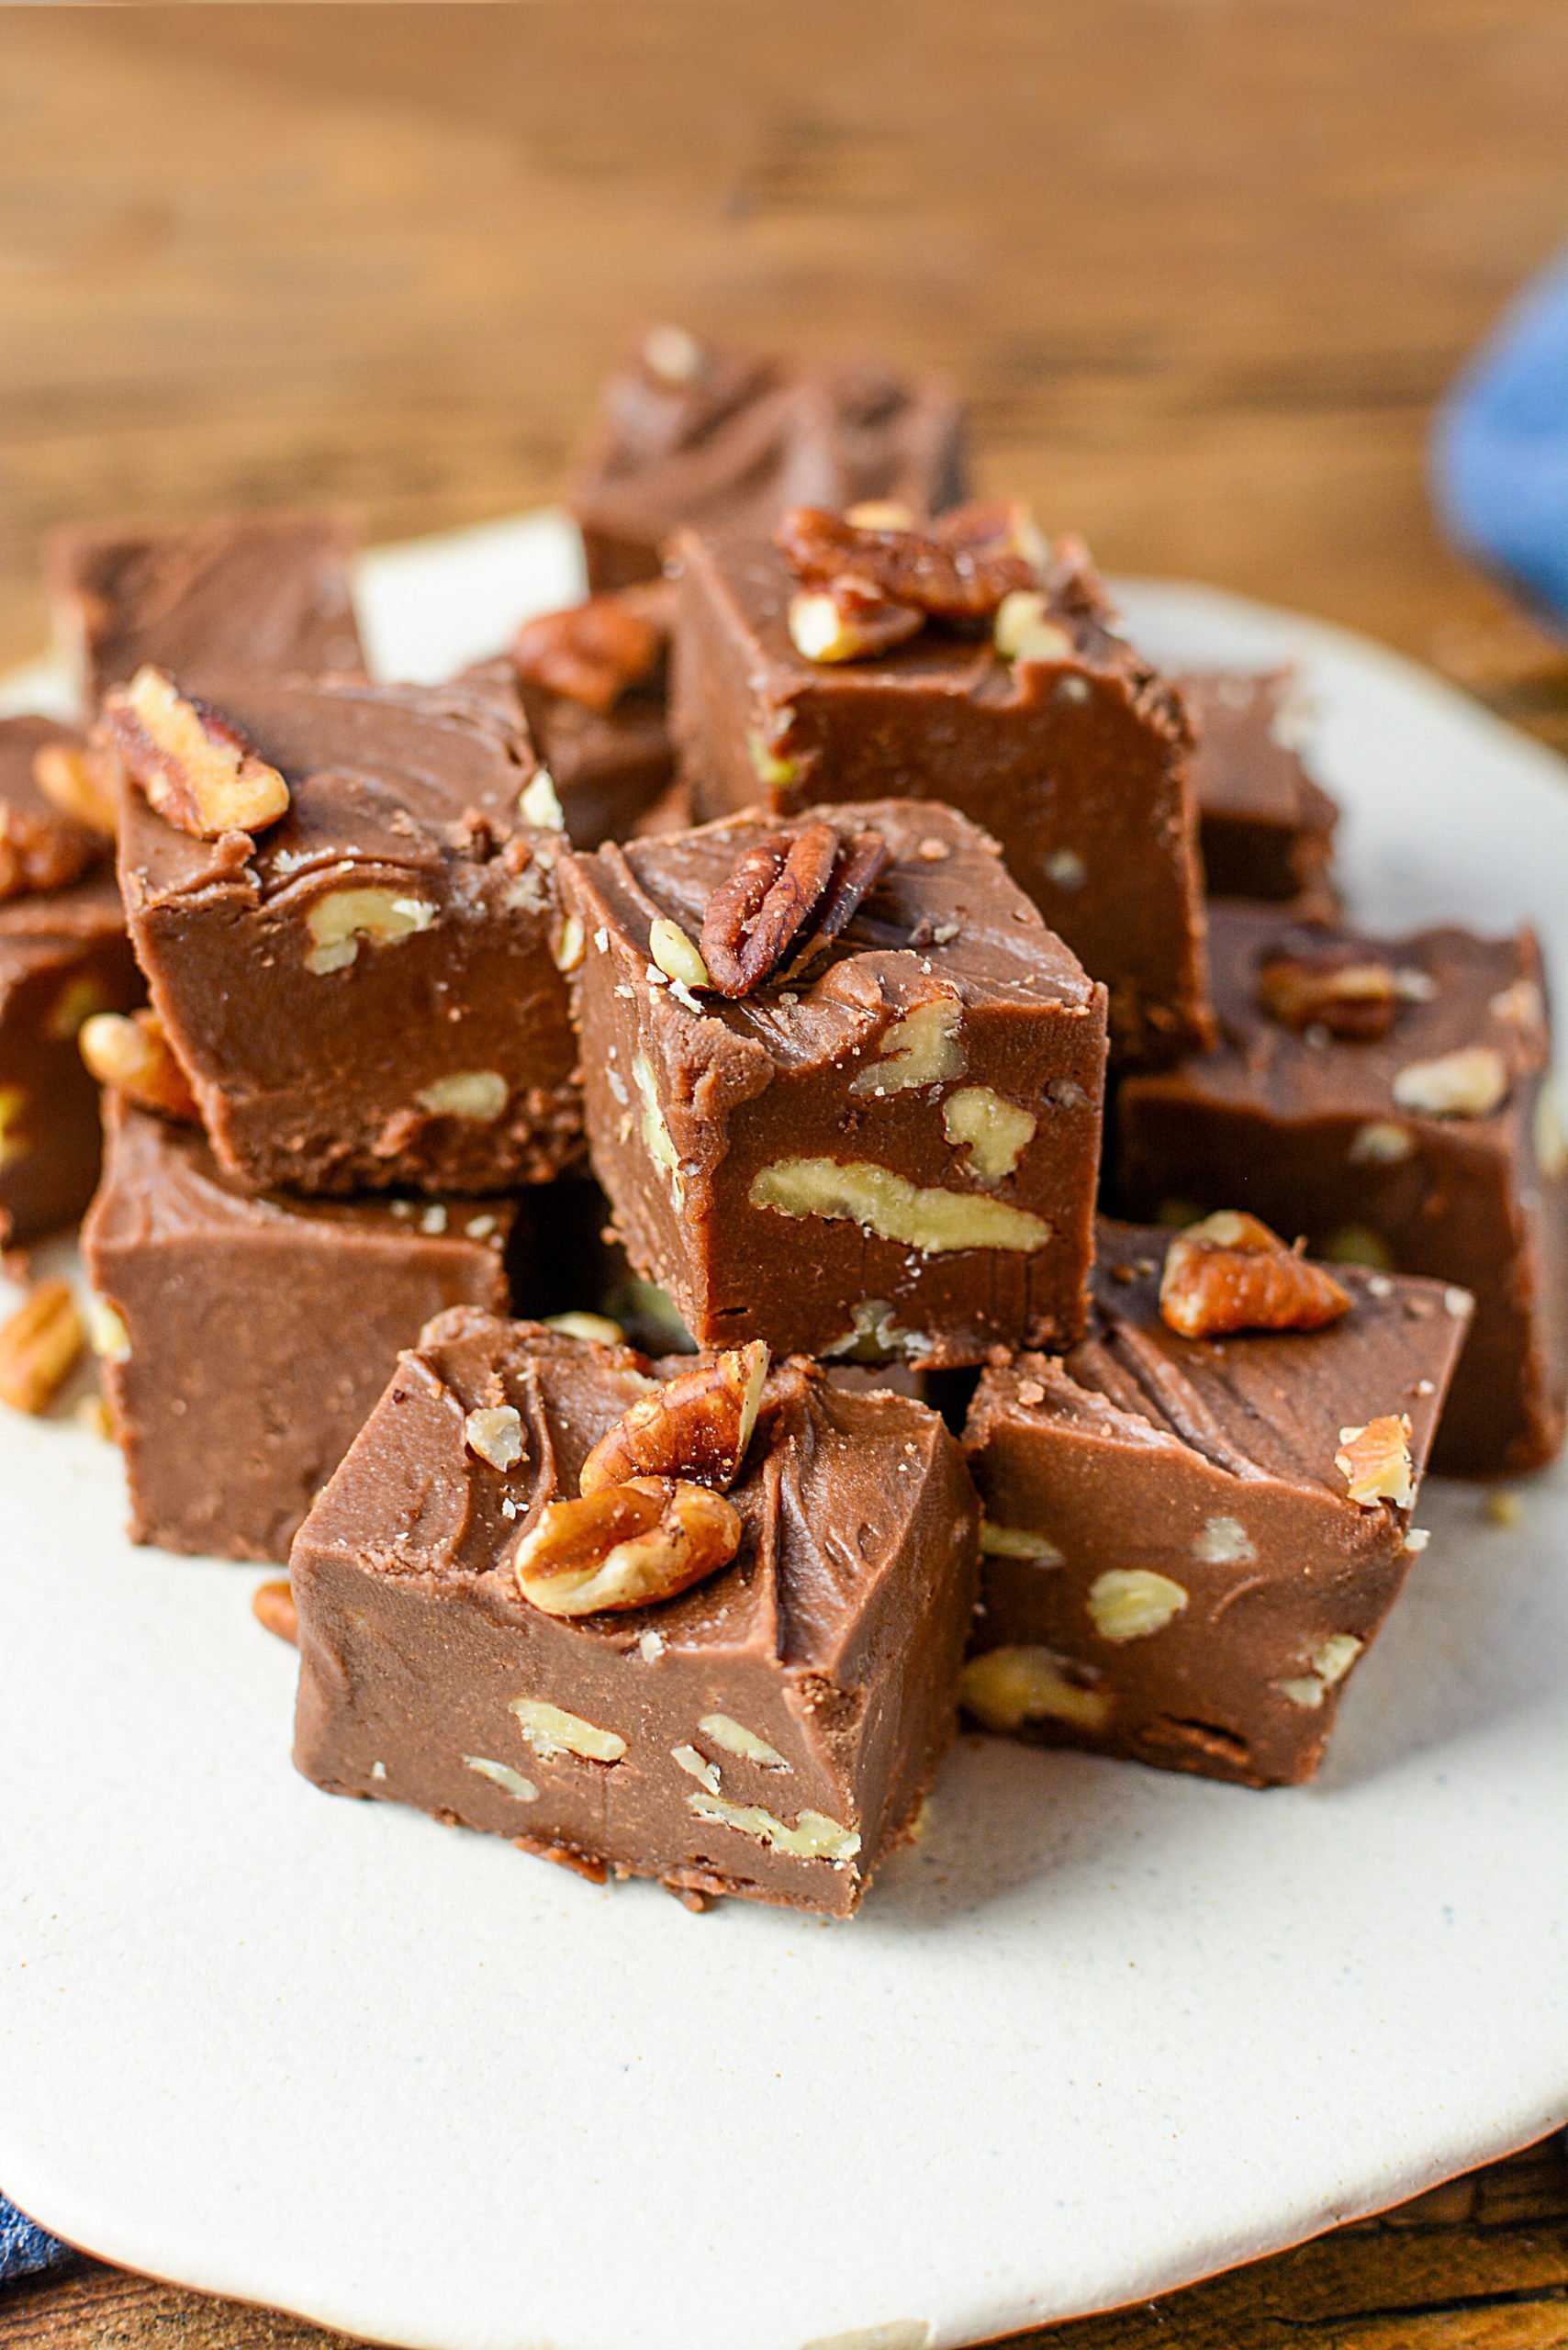 An image of around 15 blocks of chocolate fudge with nuts, sitting on a white plate.